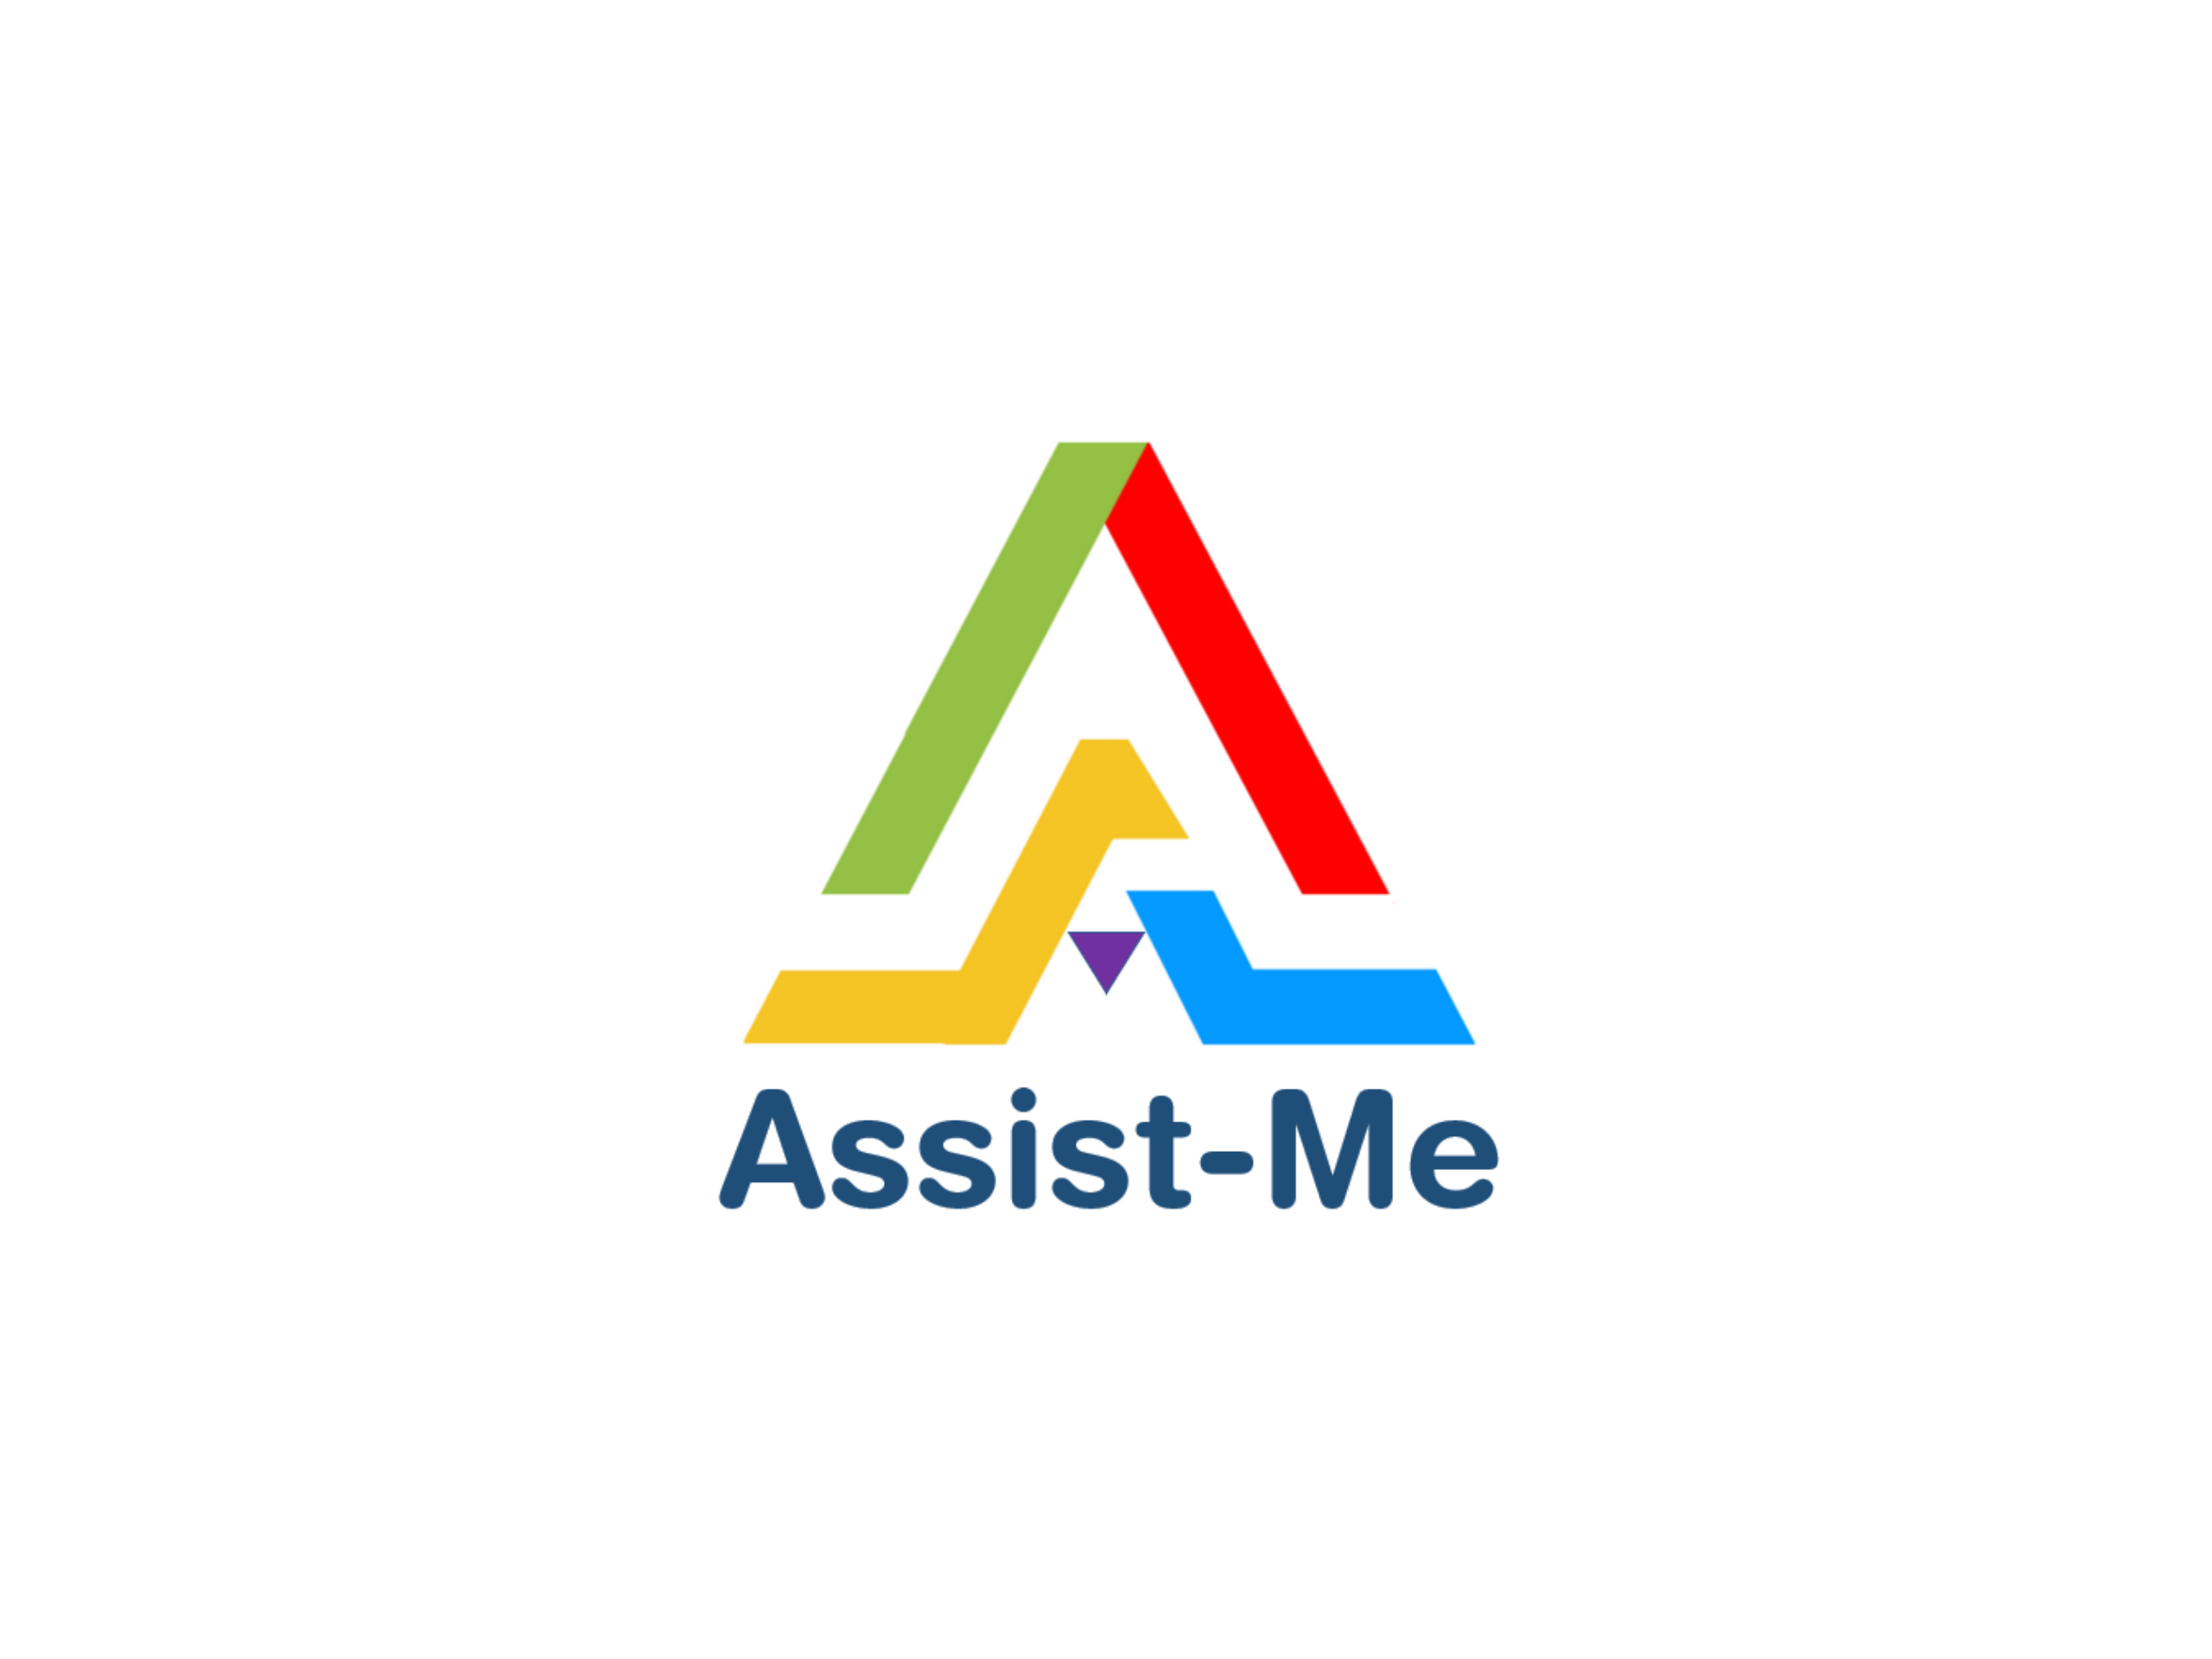 Logo of Assist-Me by Converse 360